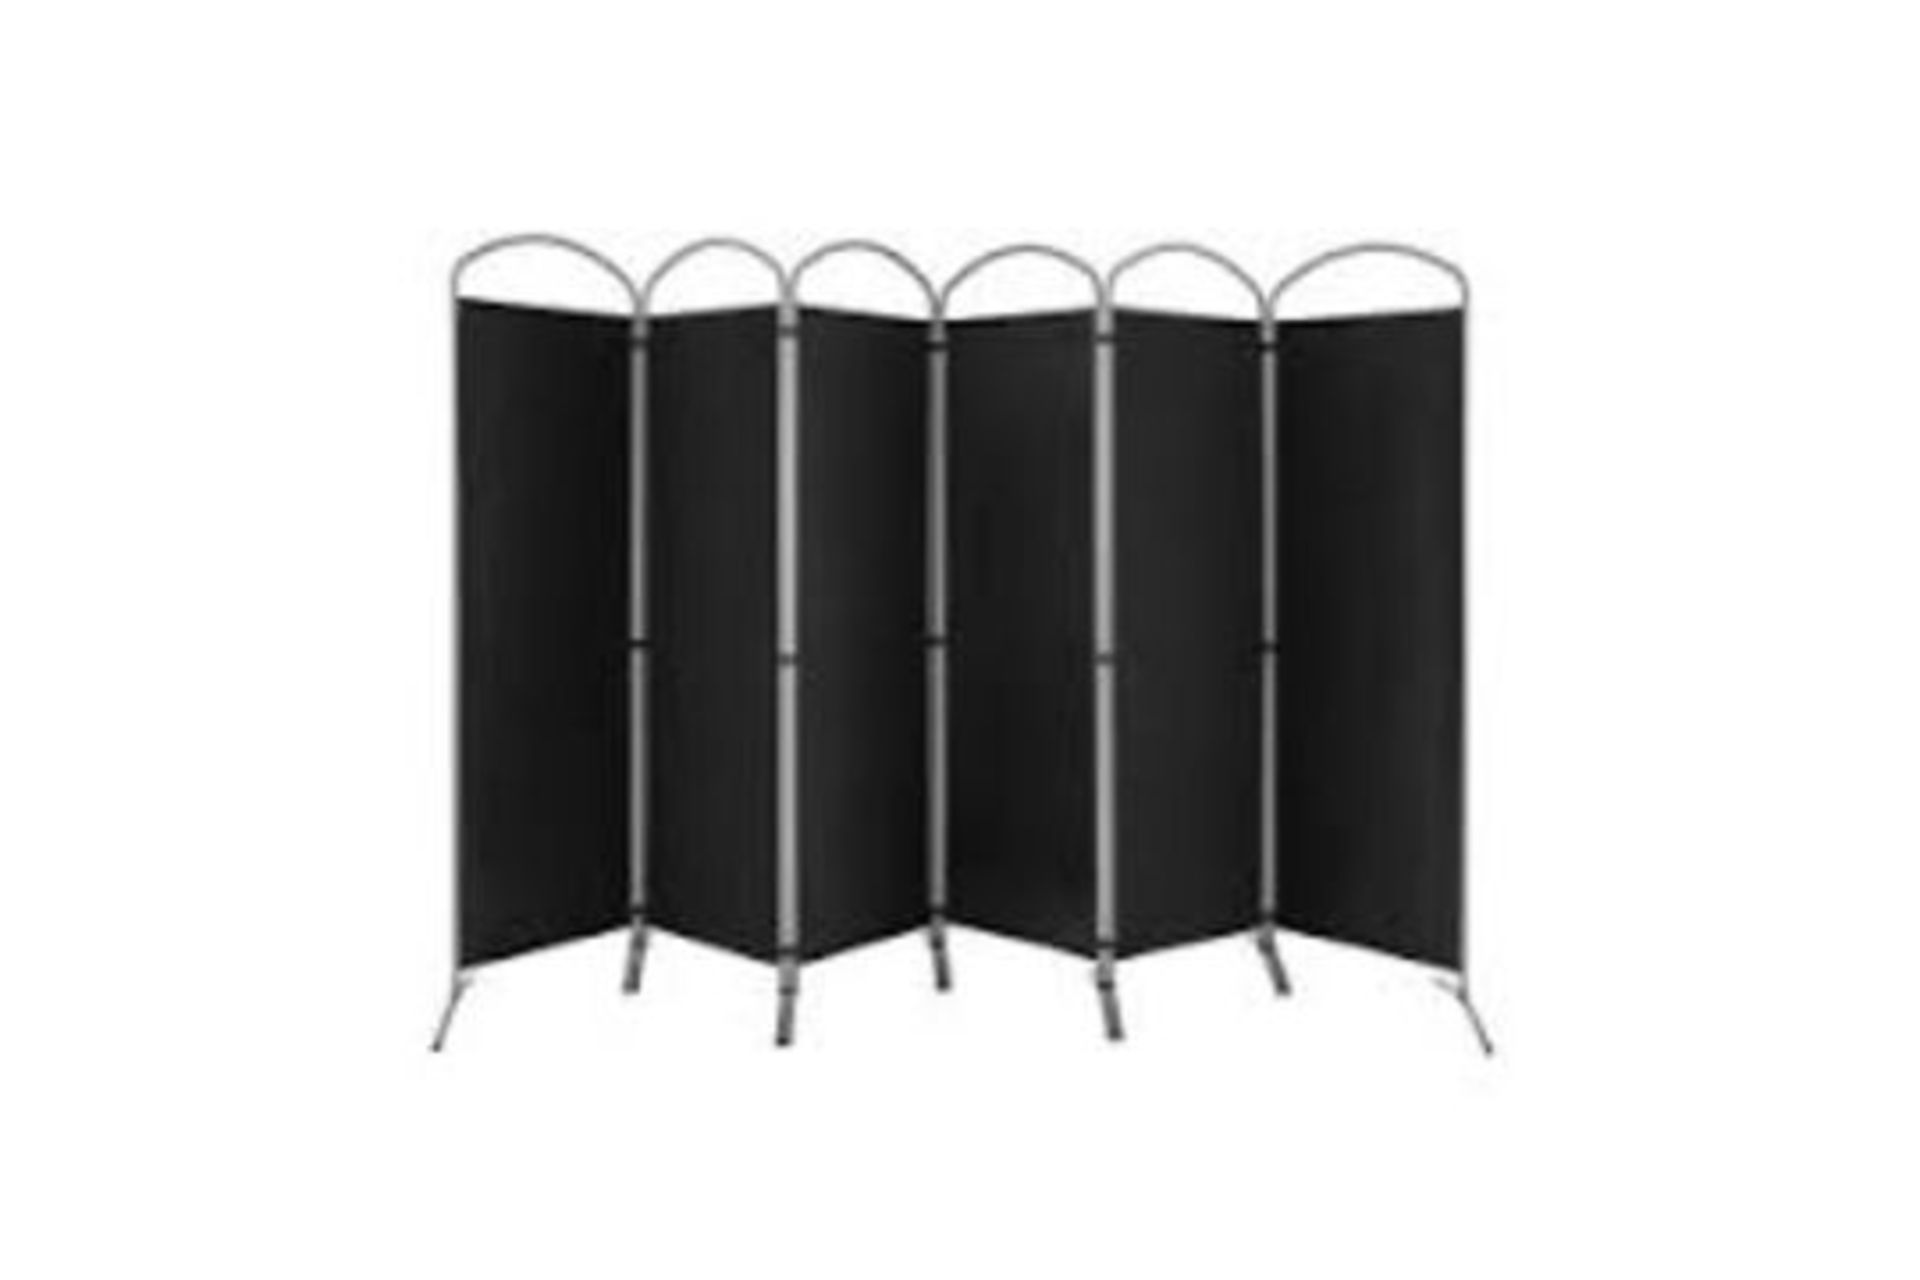 6 Panel Folding Room Divider with Hand-Woven Wicker . -R13a.13.